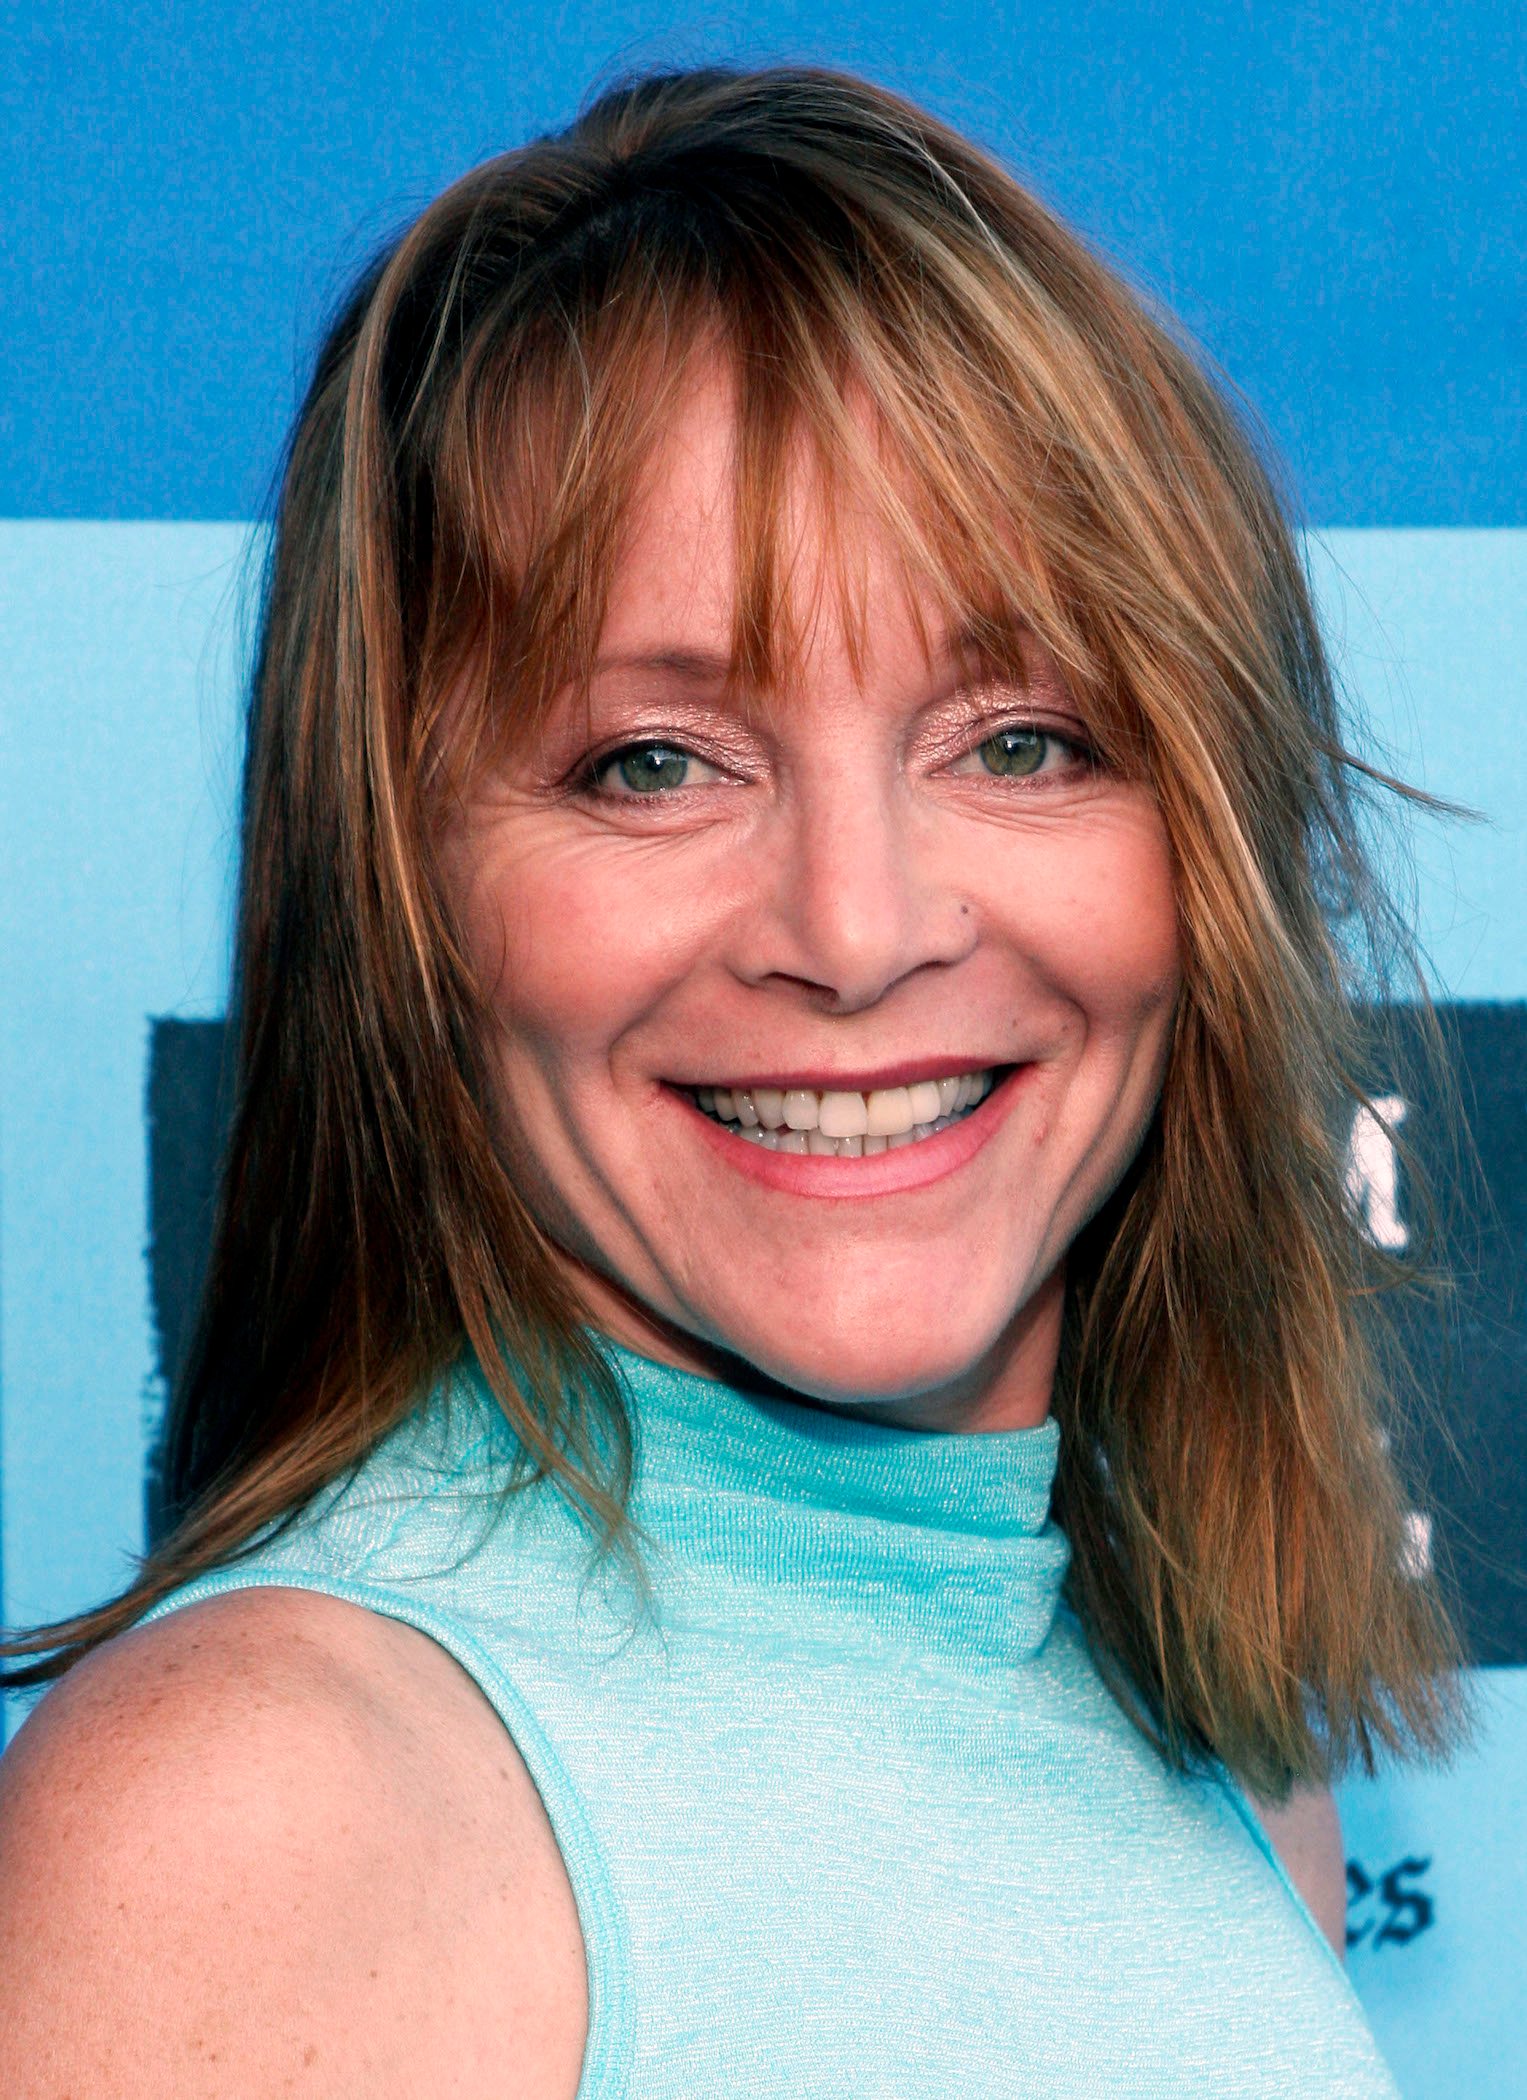 A close-up of Mary Mara during the 2006 Los Angeles Film Festival